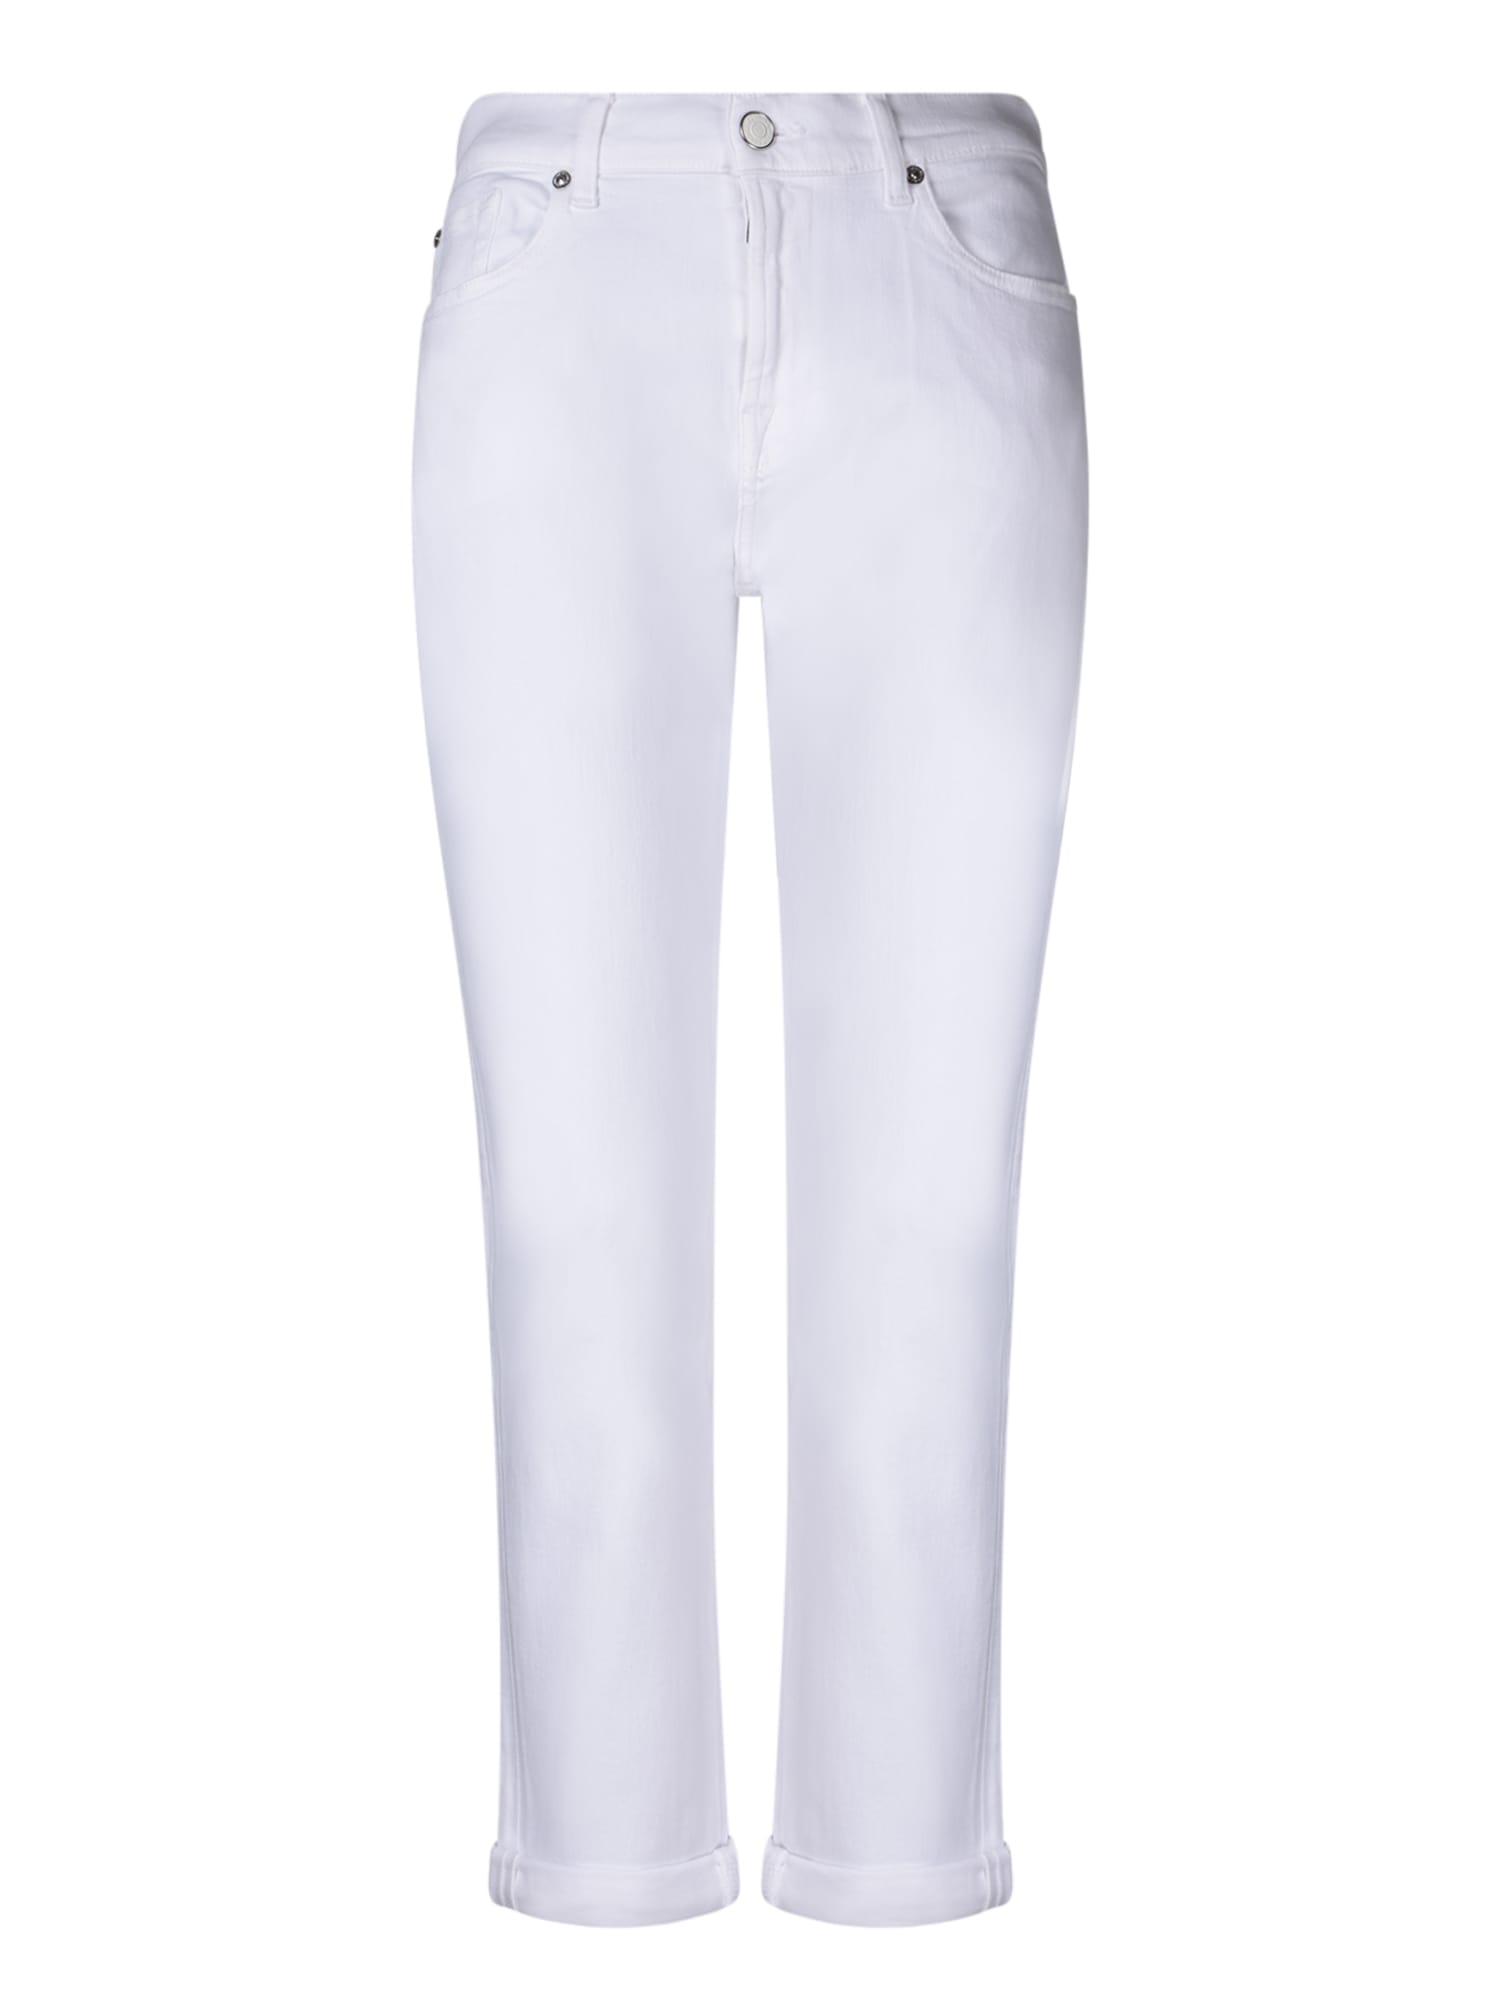 Josefina White Jeans By 7 For All Mankind